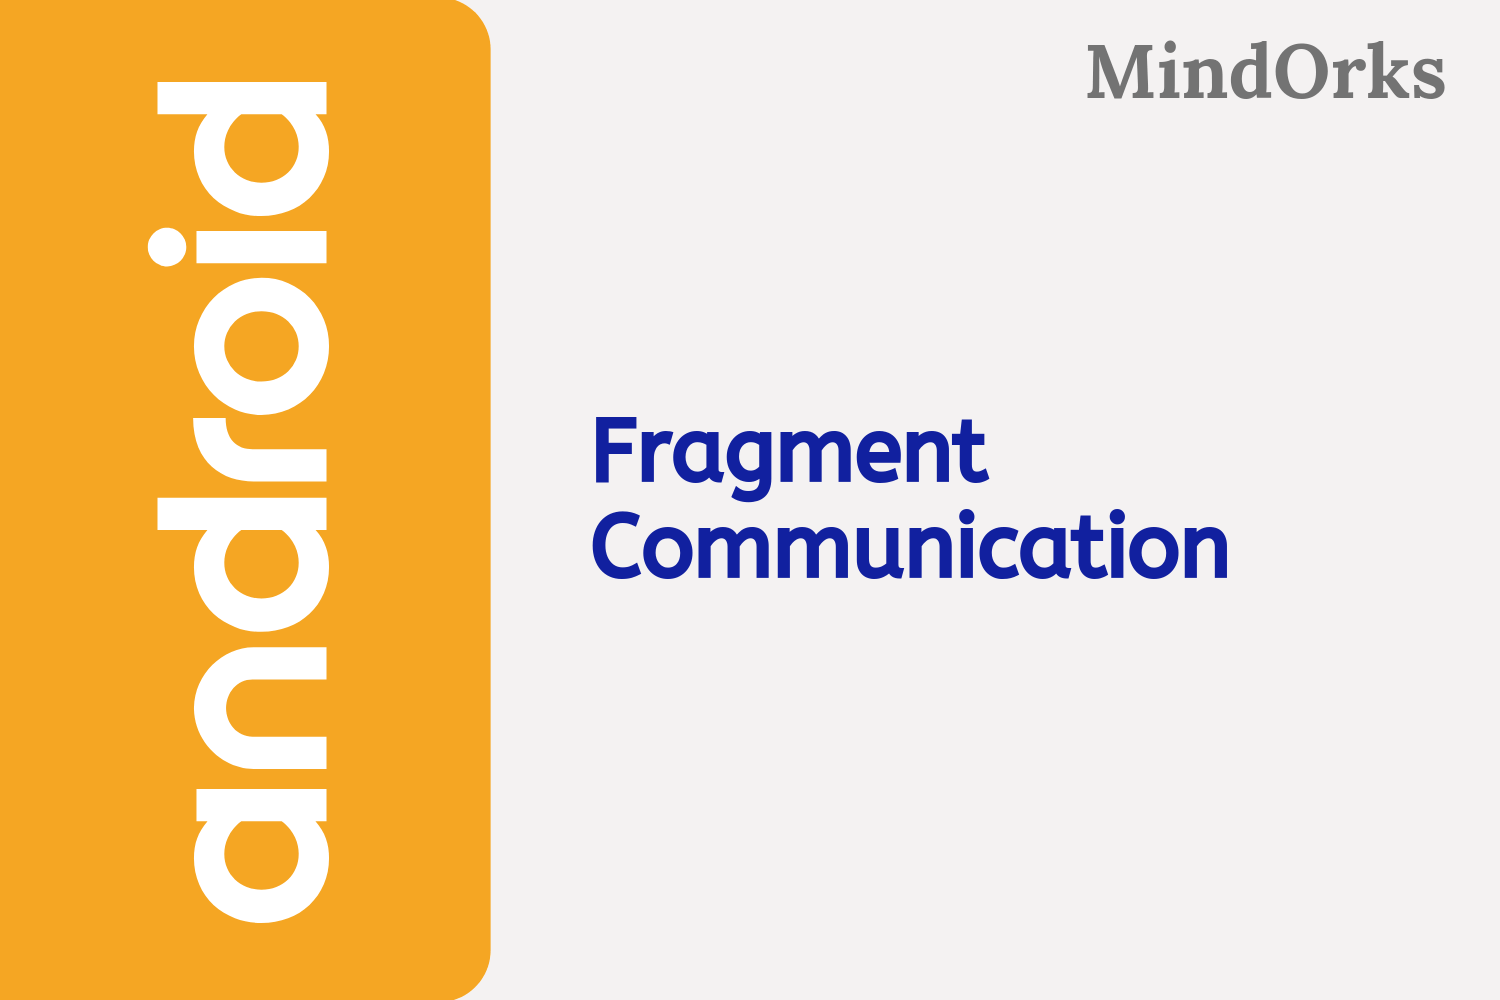 How to communicate between fragments?